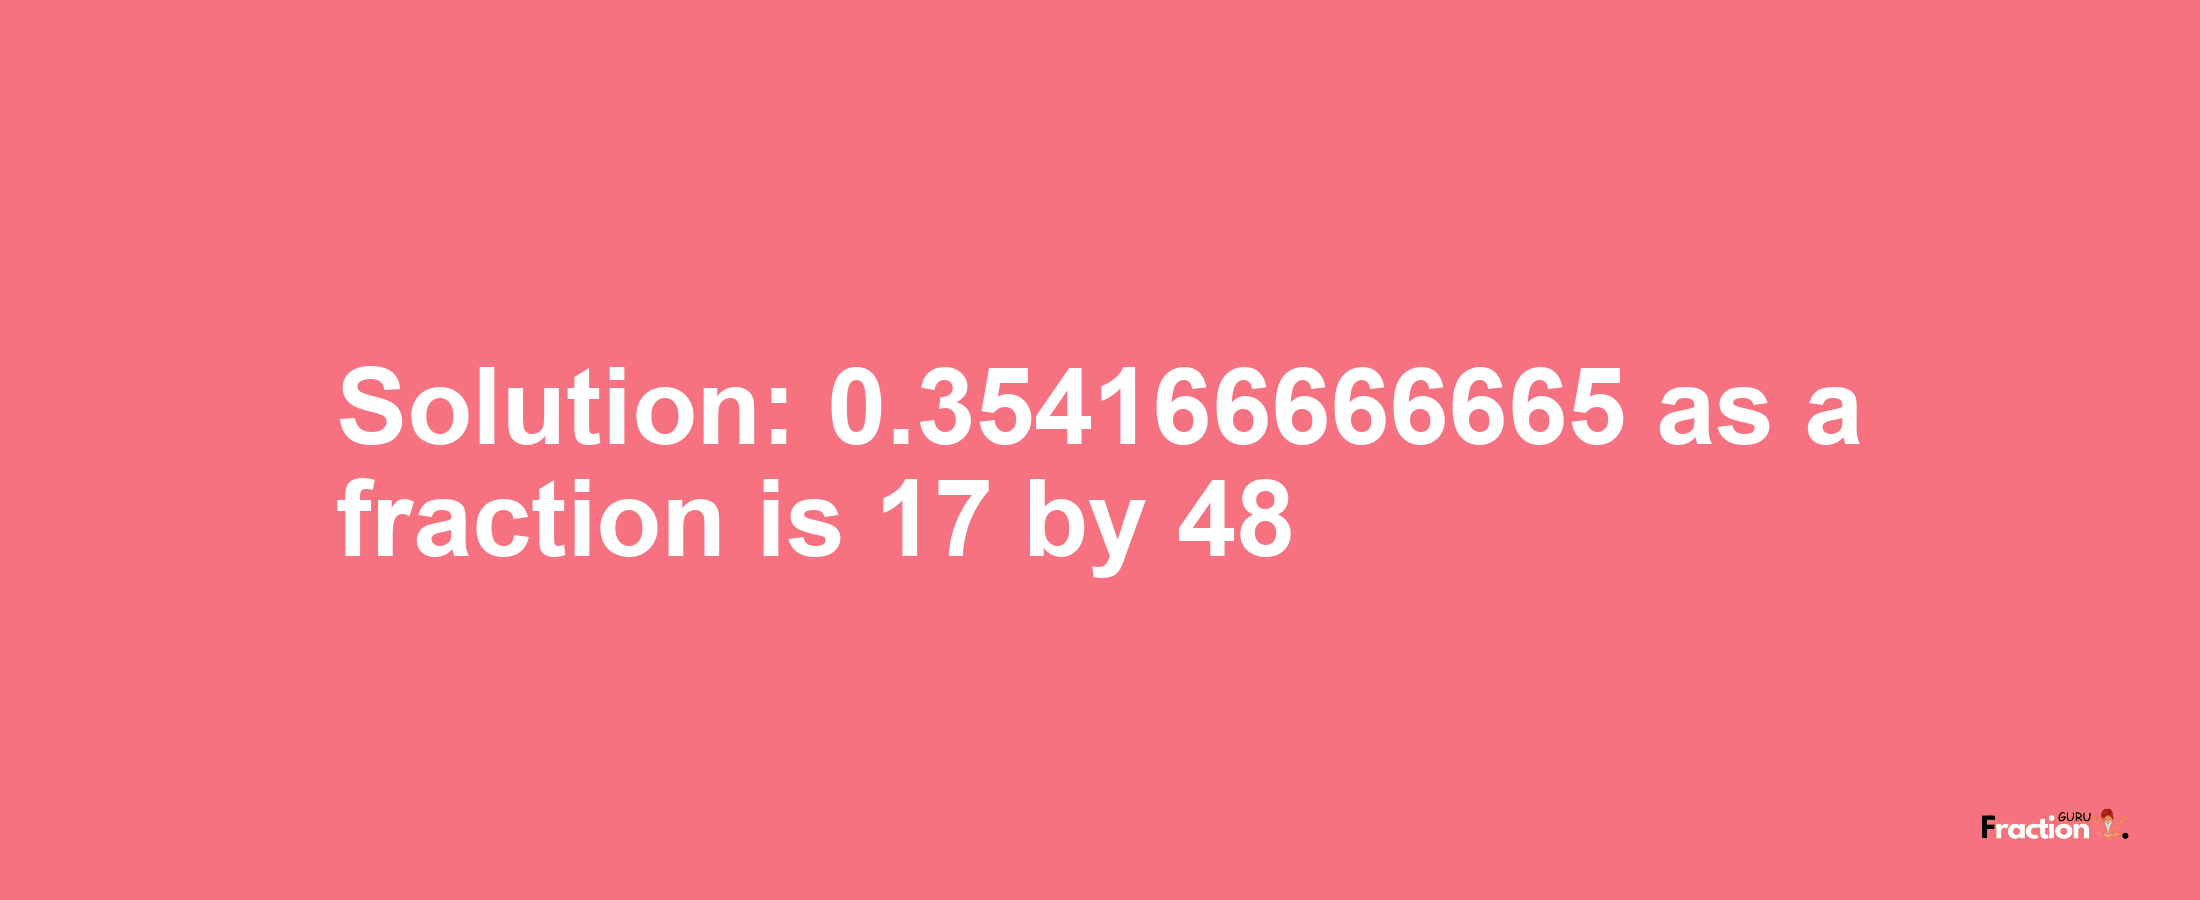 Solution:0.354166666665 as a fraction is 17/48